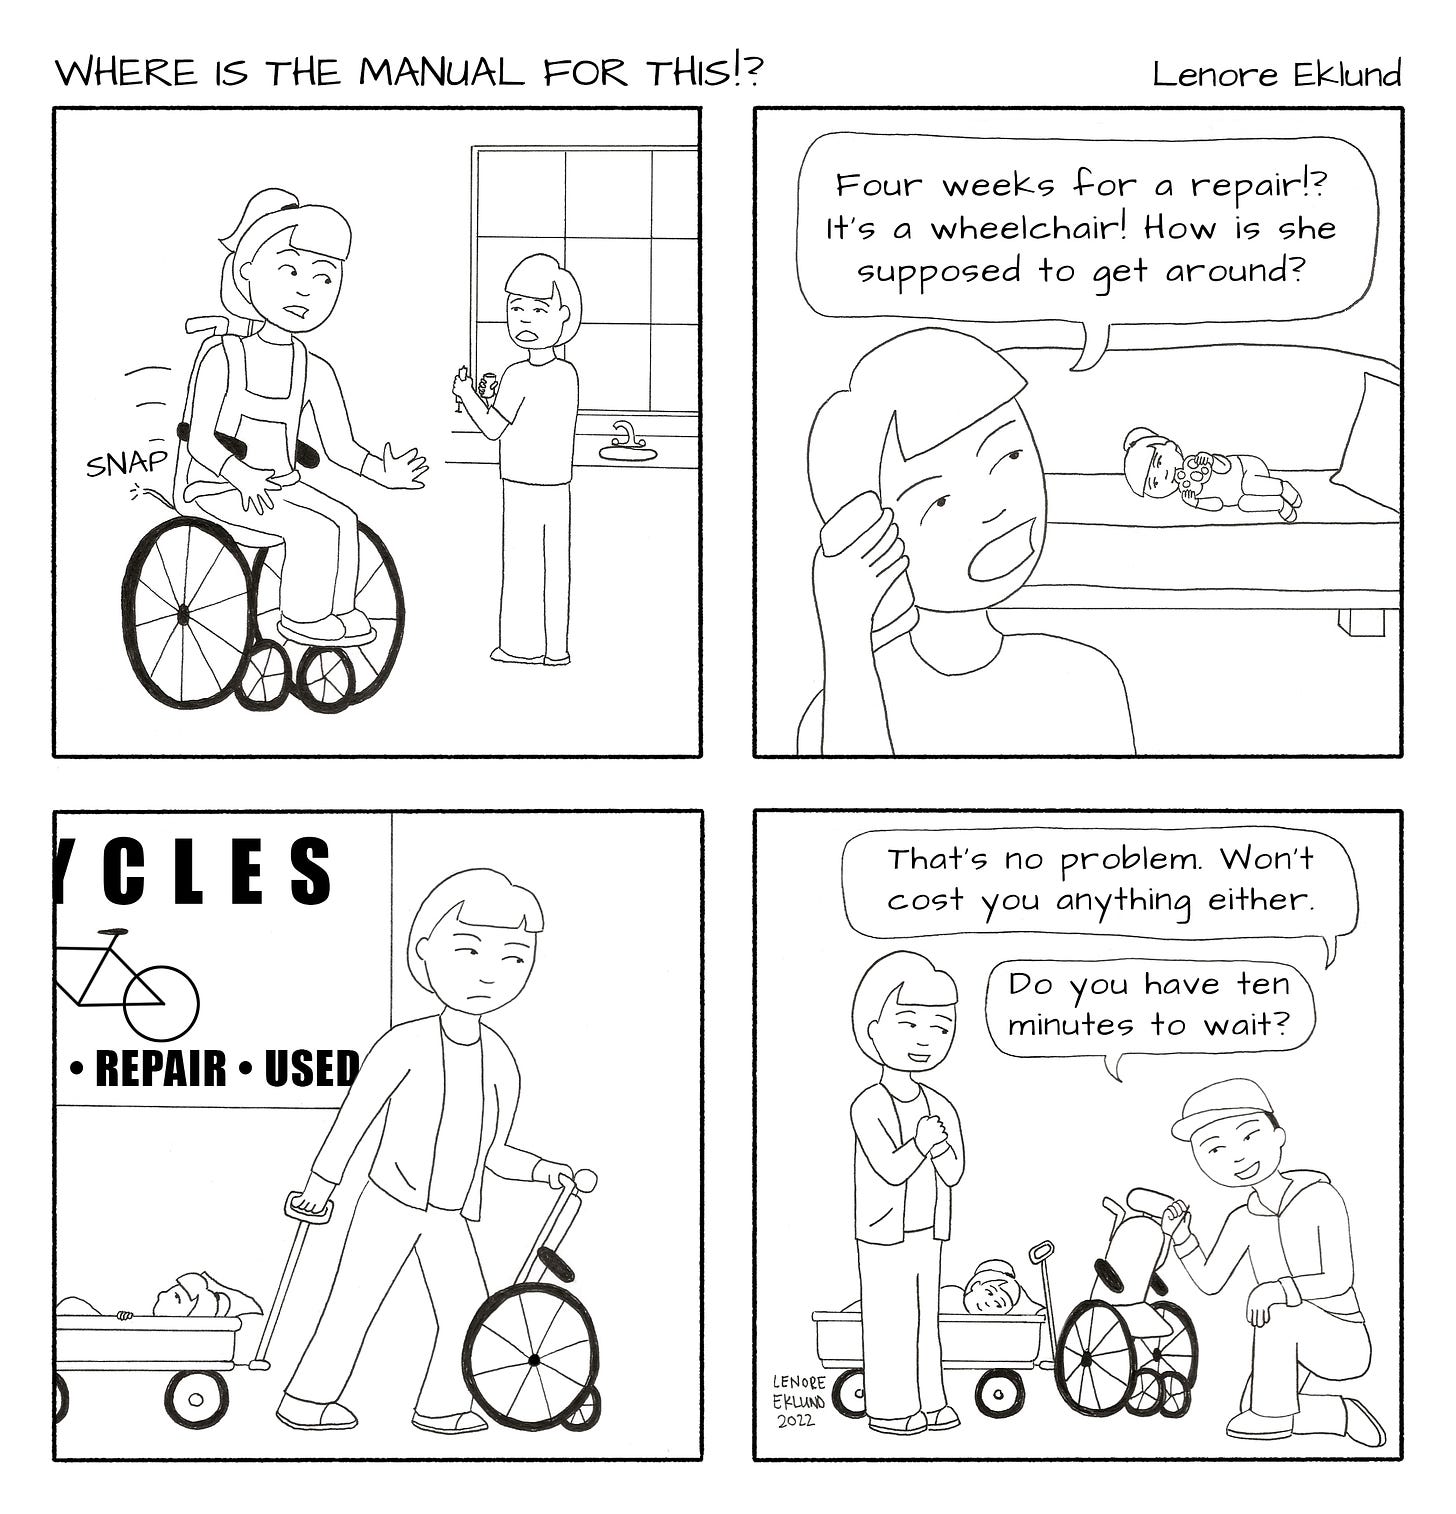 A four-panel line drawing cartoon titled Where is the Manual for This!? by Lenore Eklund. The first panel shows a girl in a wheelchair in the foreground looking startled with a “SNAP” next to a strap. A mother in the background holding a syringe set next to the sink looks over her shoulder in surprise. The second panel, the mom is in the foreground on the phone while the girl lays on her side on a couch. The mom’s speech bubble reads “Four weeks for a repair!? It’s a wheelchair! How is she supposed to get around?” The third panel is the mom looking determined, pushing the wheelchair and pulling a wagon with her daughter in it, past a sign that reads “Bicycles: Repair - Used”. The fourth panel show the mom clasping her hands and smiling while the daughter also smiles from her wagon. A staffer in a ball cap kneels next to the wheelchair and says “That’s no problem. Won’t cost you anything either. Do you have ten minutes to wait?”